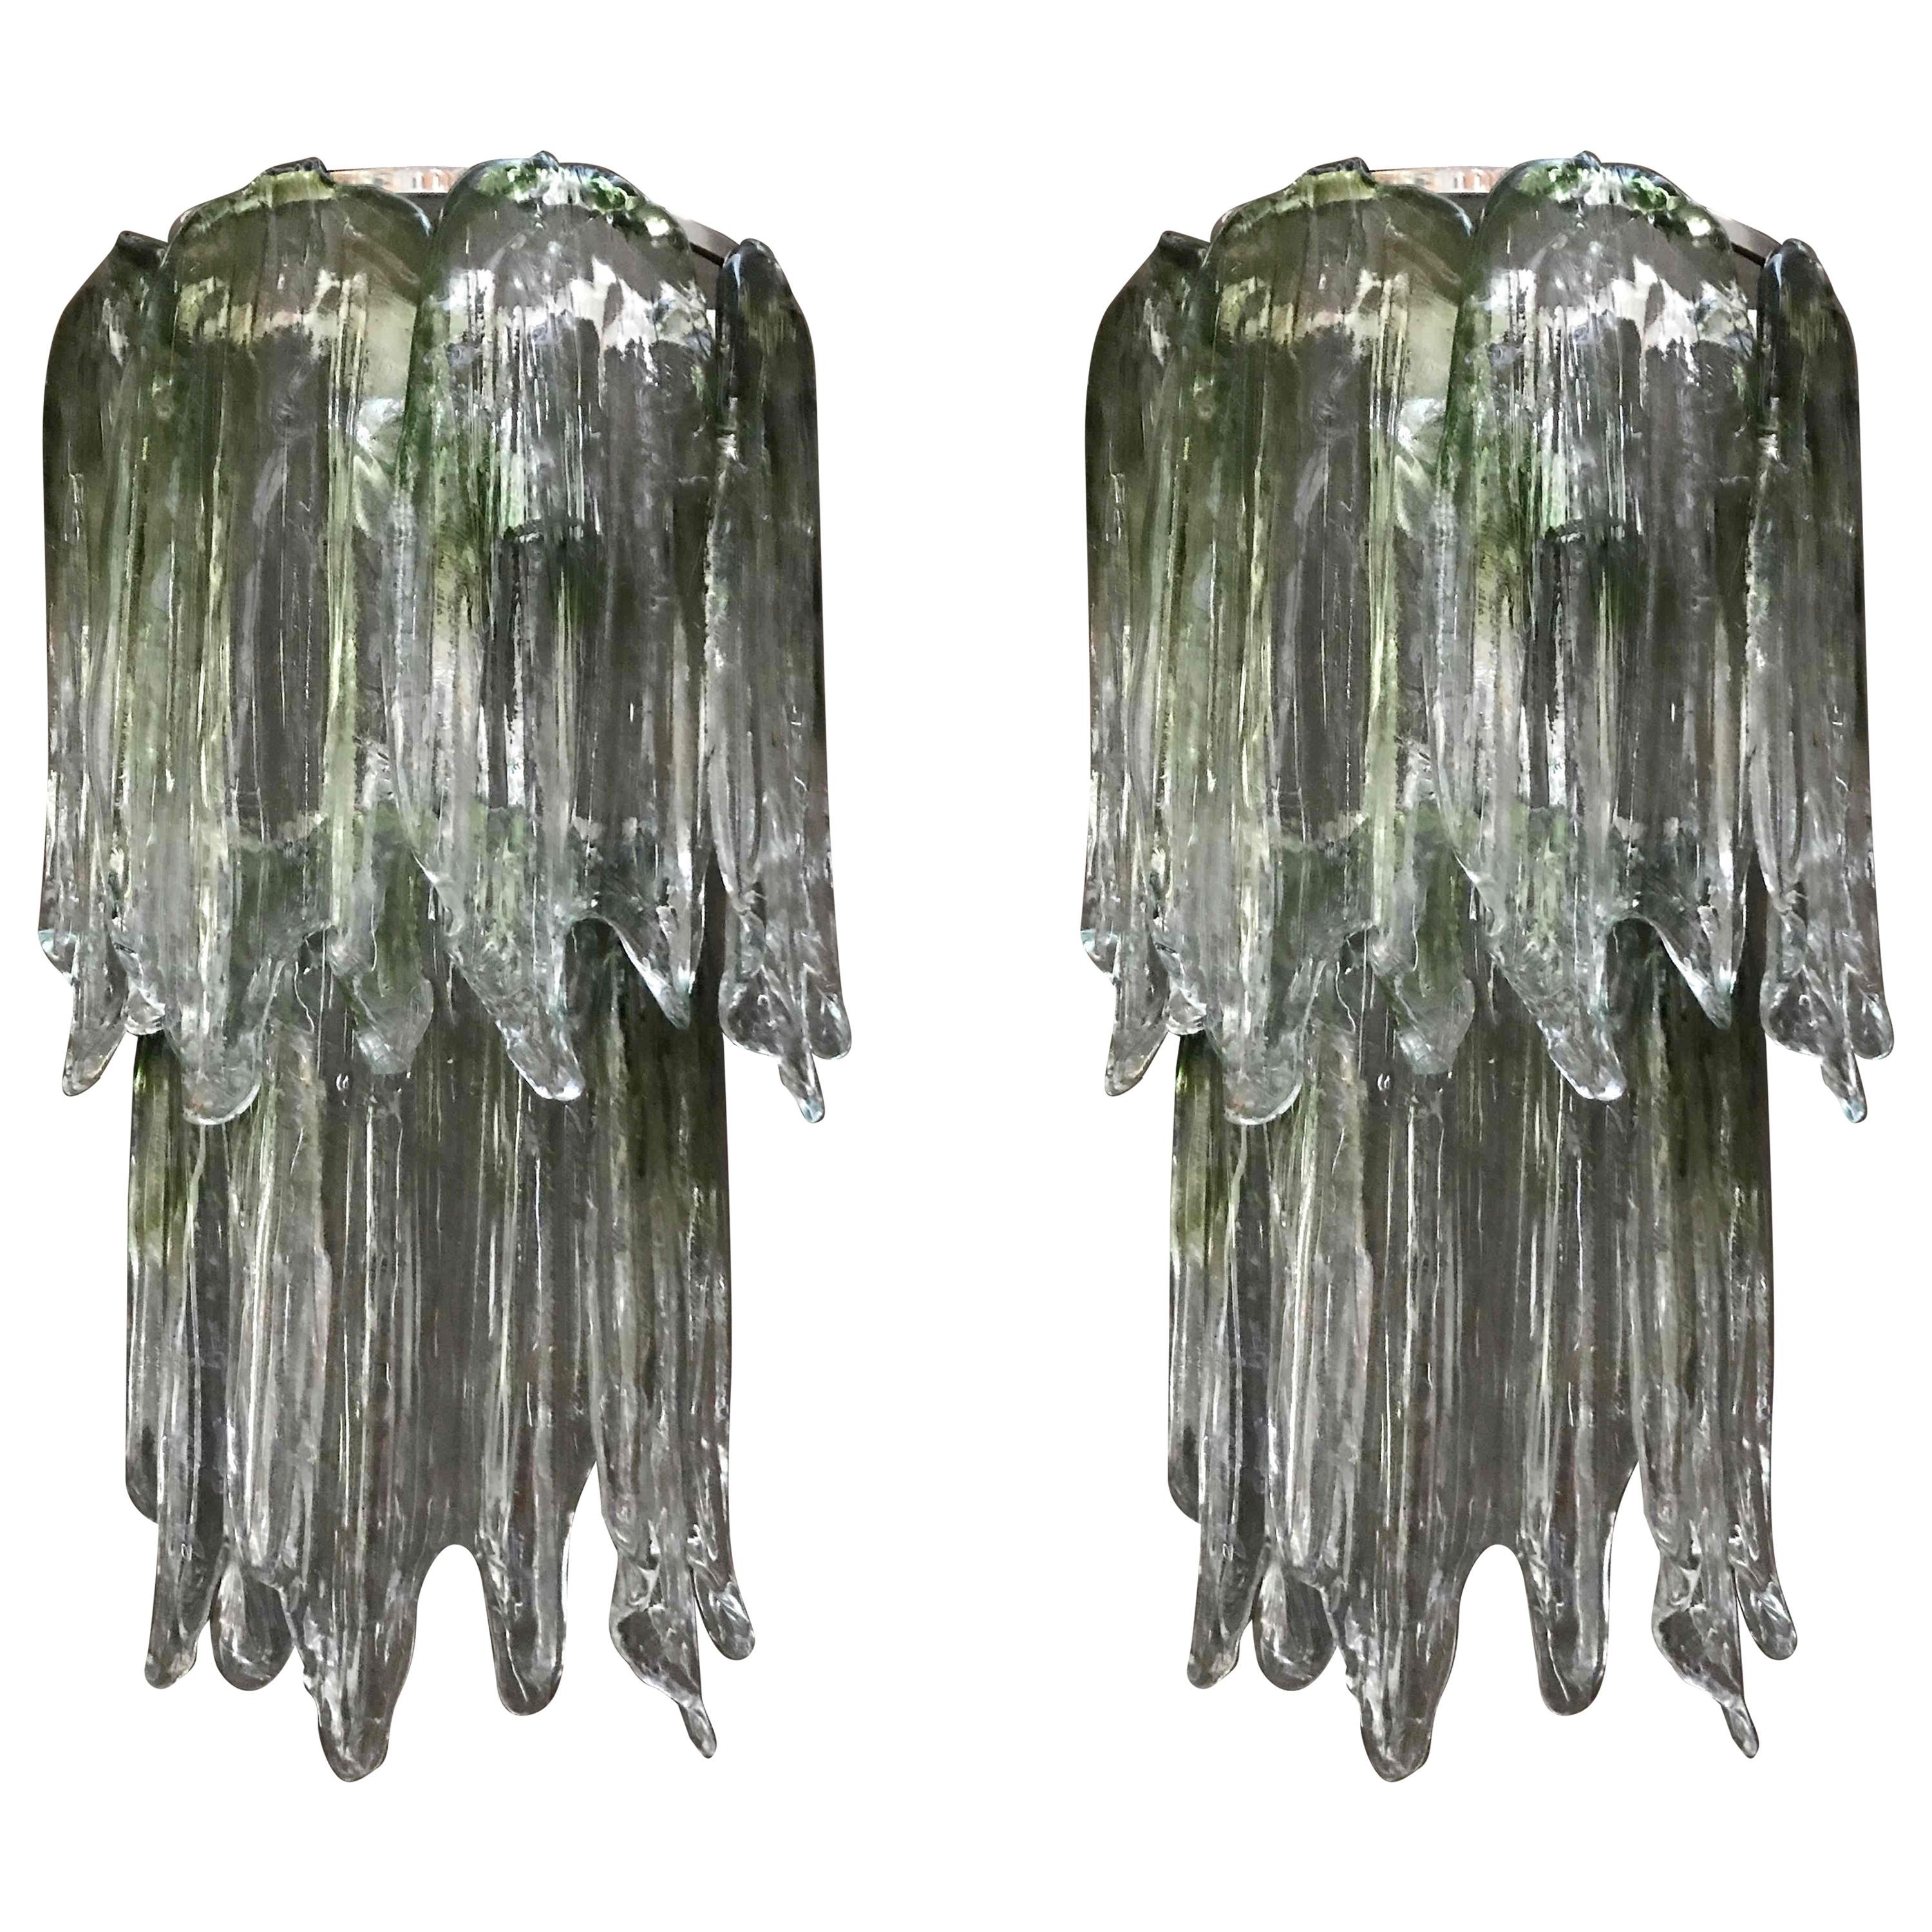 Pair of Large Fiamme Sconces by Mazzega